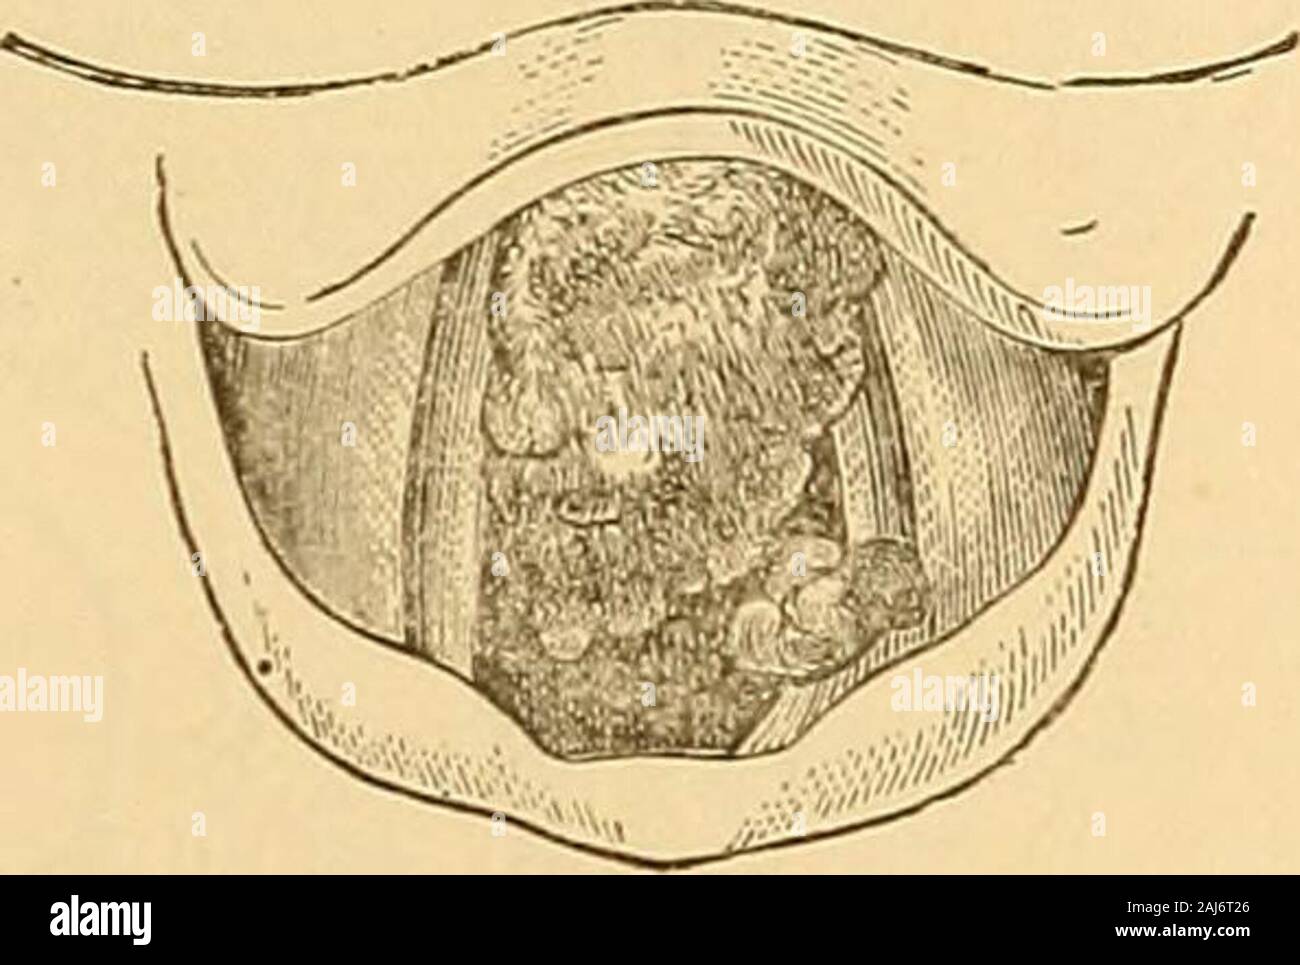 Clinical lectures on the principles and practice of medicine . Fig. 13. Fig 14. As the use of the laryngoscope extends these will of course become morenumerous. The rendering ulcers and morbid growths visible by thelaryngoscope, not only establishes an exact diagnosis, but permits of thedirect application of means for their cure or removal. Fig. *7. View of the healthy larynx with the laryngoscope, when the vocal cordsare closed as in sounding high notes.—(Czermak.) Fig. 8. Another view of the healthy larynx during ordinary breathing.—(Czermak.)Fig. 9. Another view during deep inspiration, wit Stock Photo